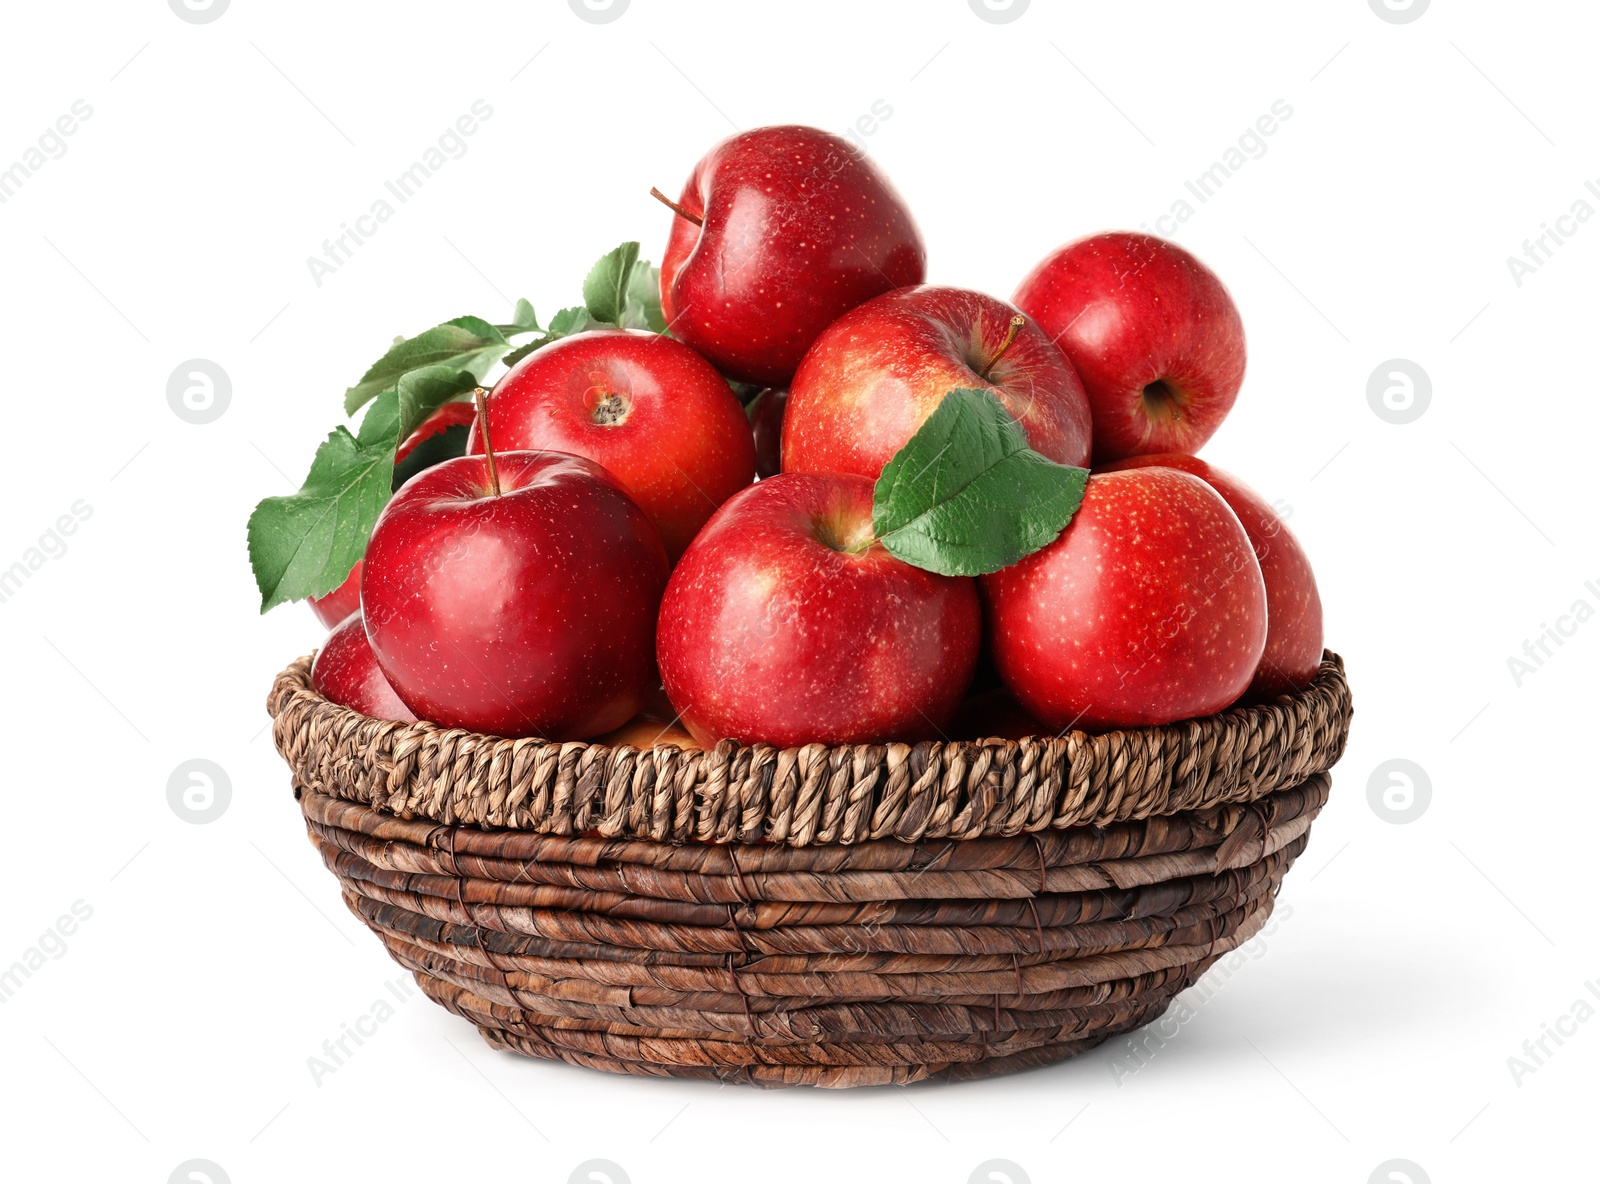 Photo of Juicy red apples in wicker basket on white background